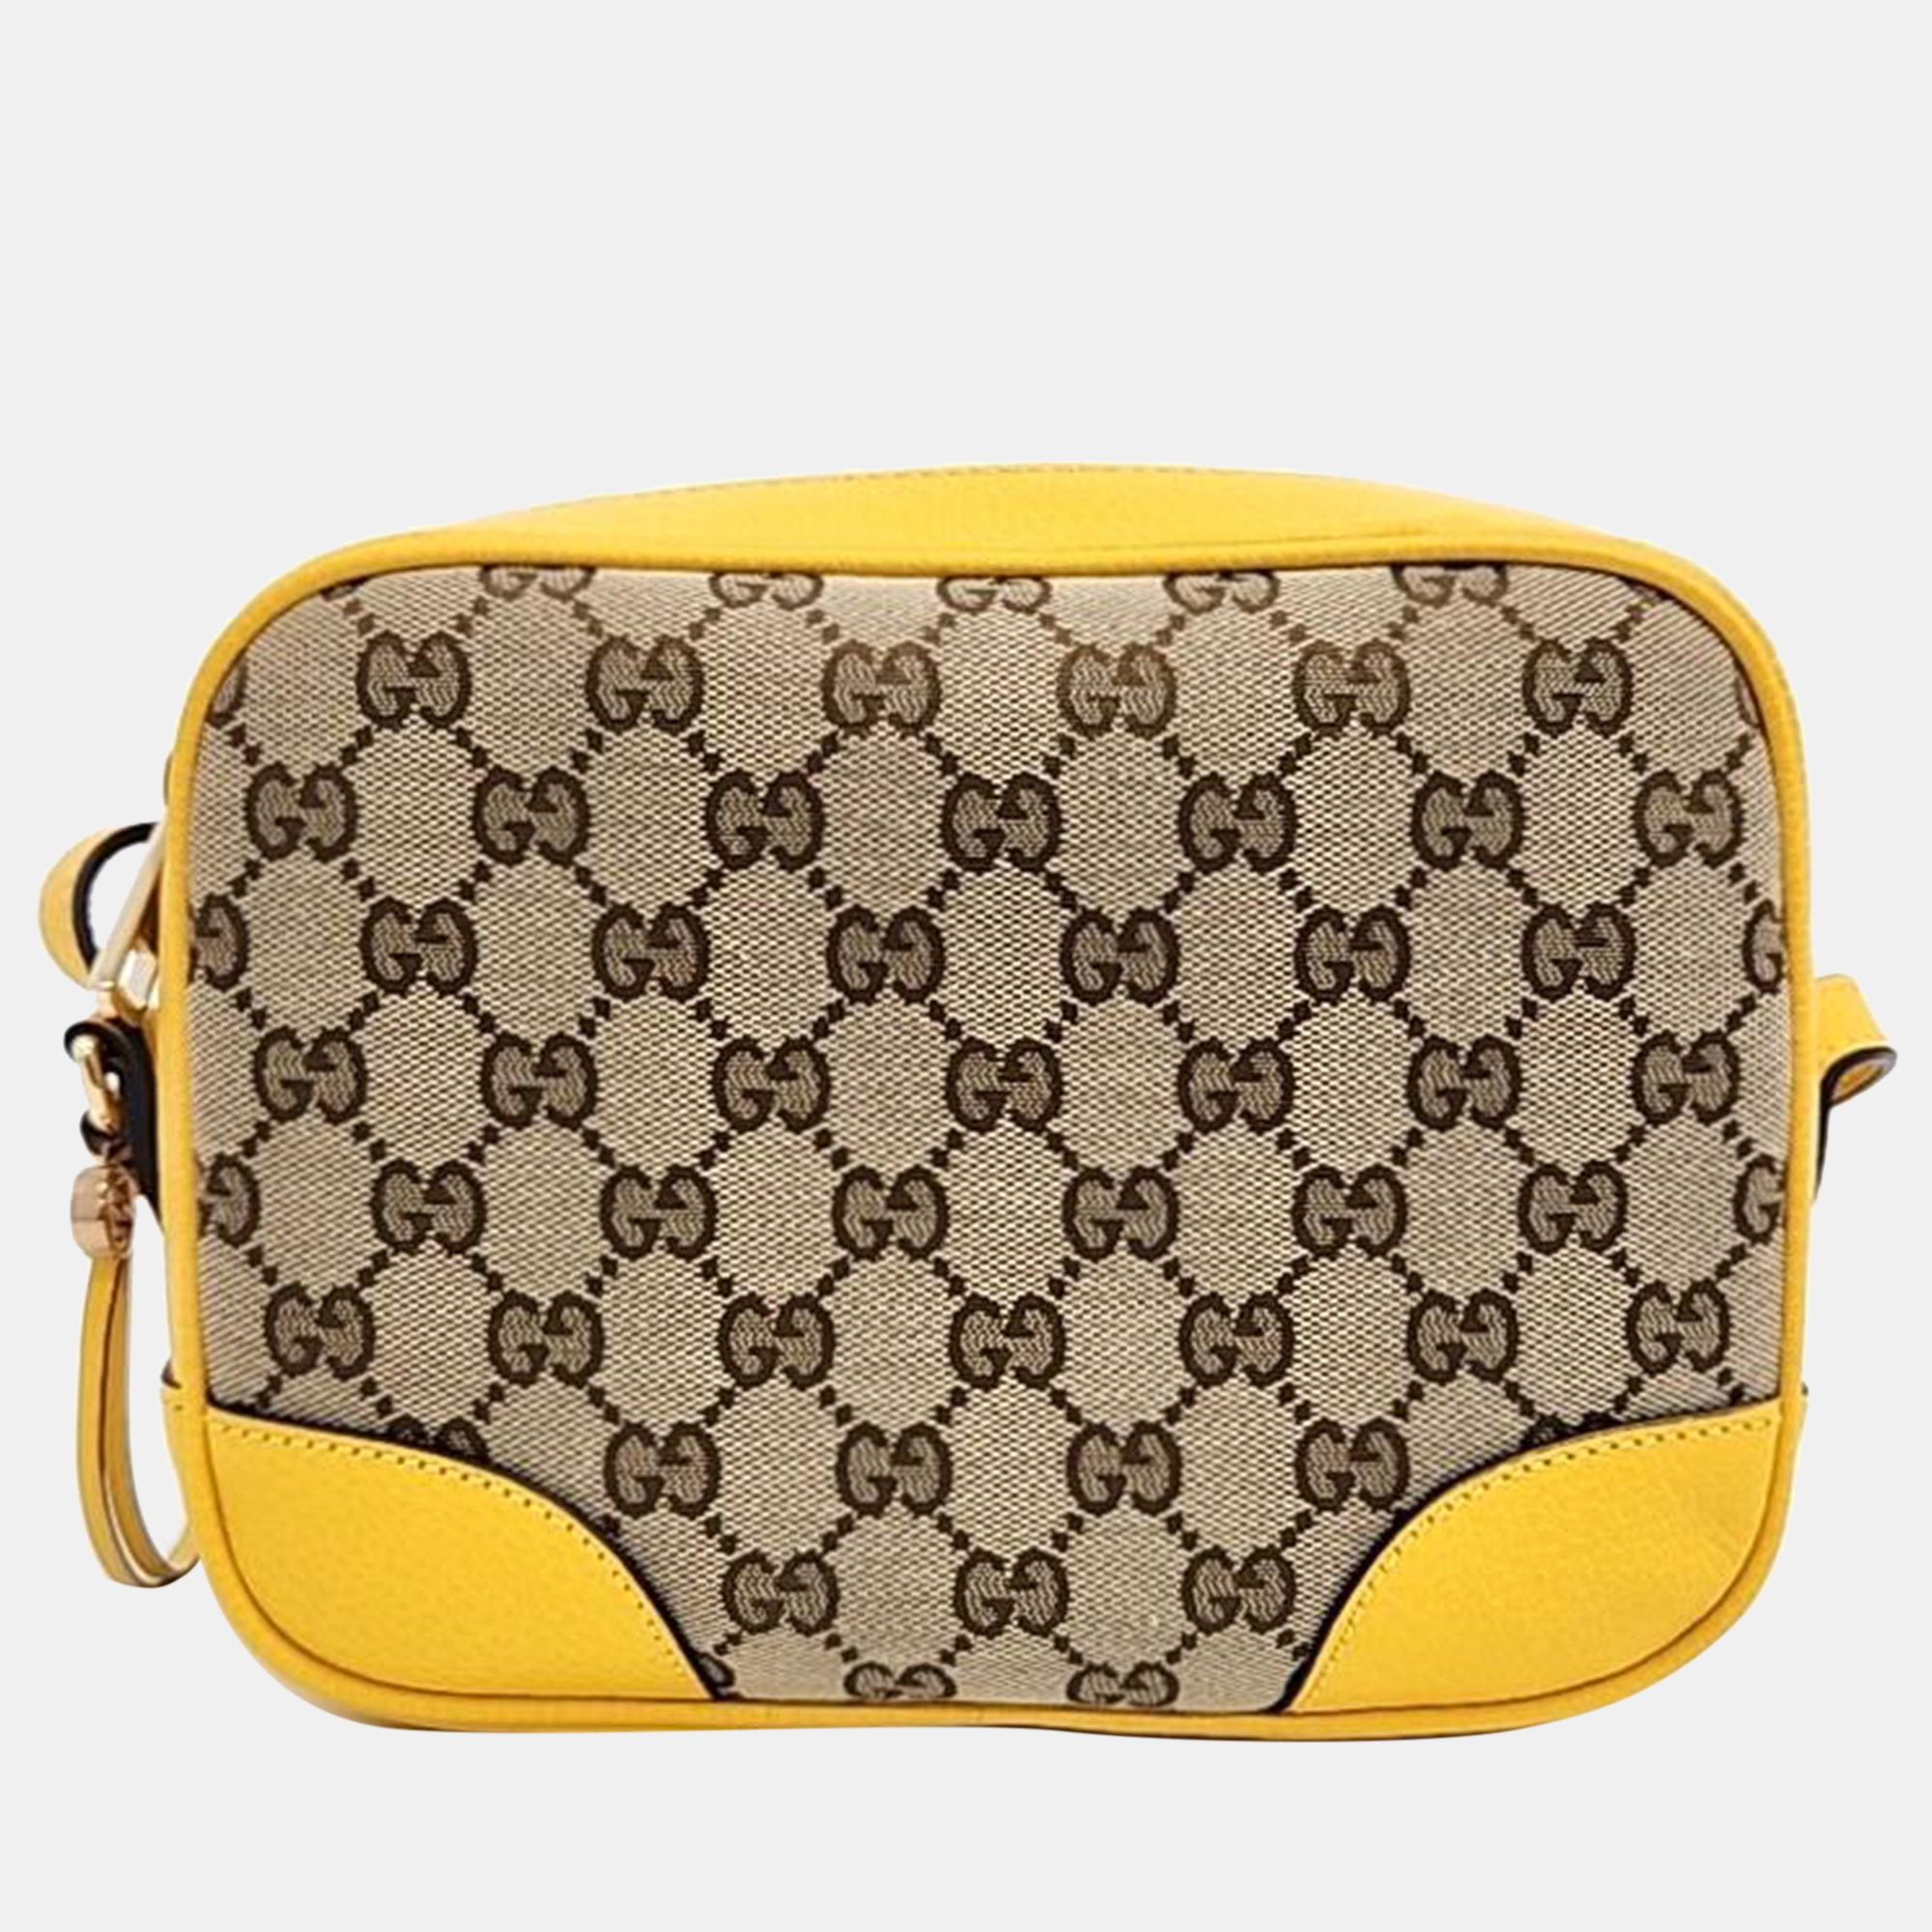 Carry this lovely Gucci bag as a stylish accompaniment to your ensemble. Made from high quality materials it has a luxe look and durable quality.